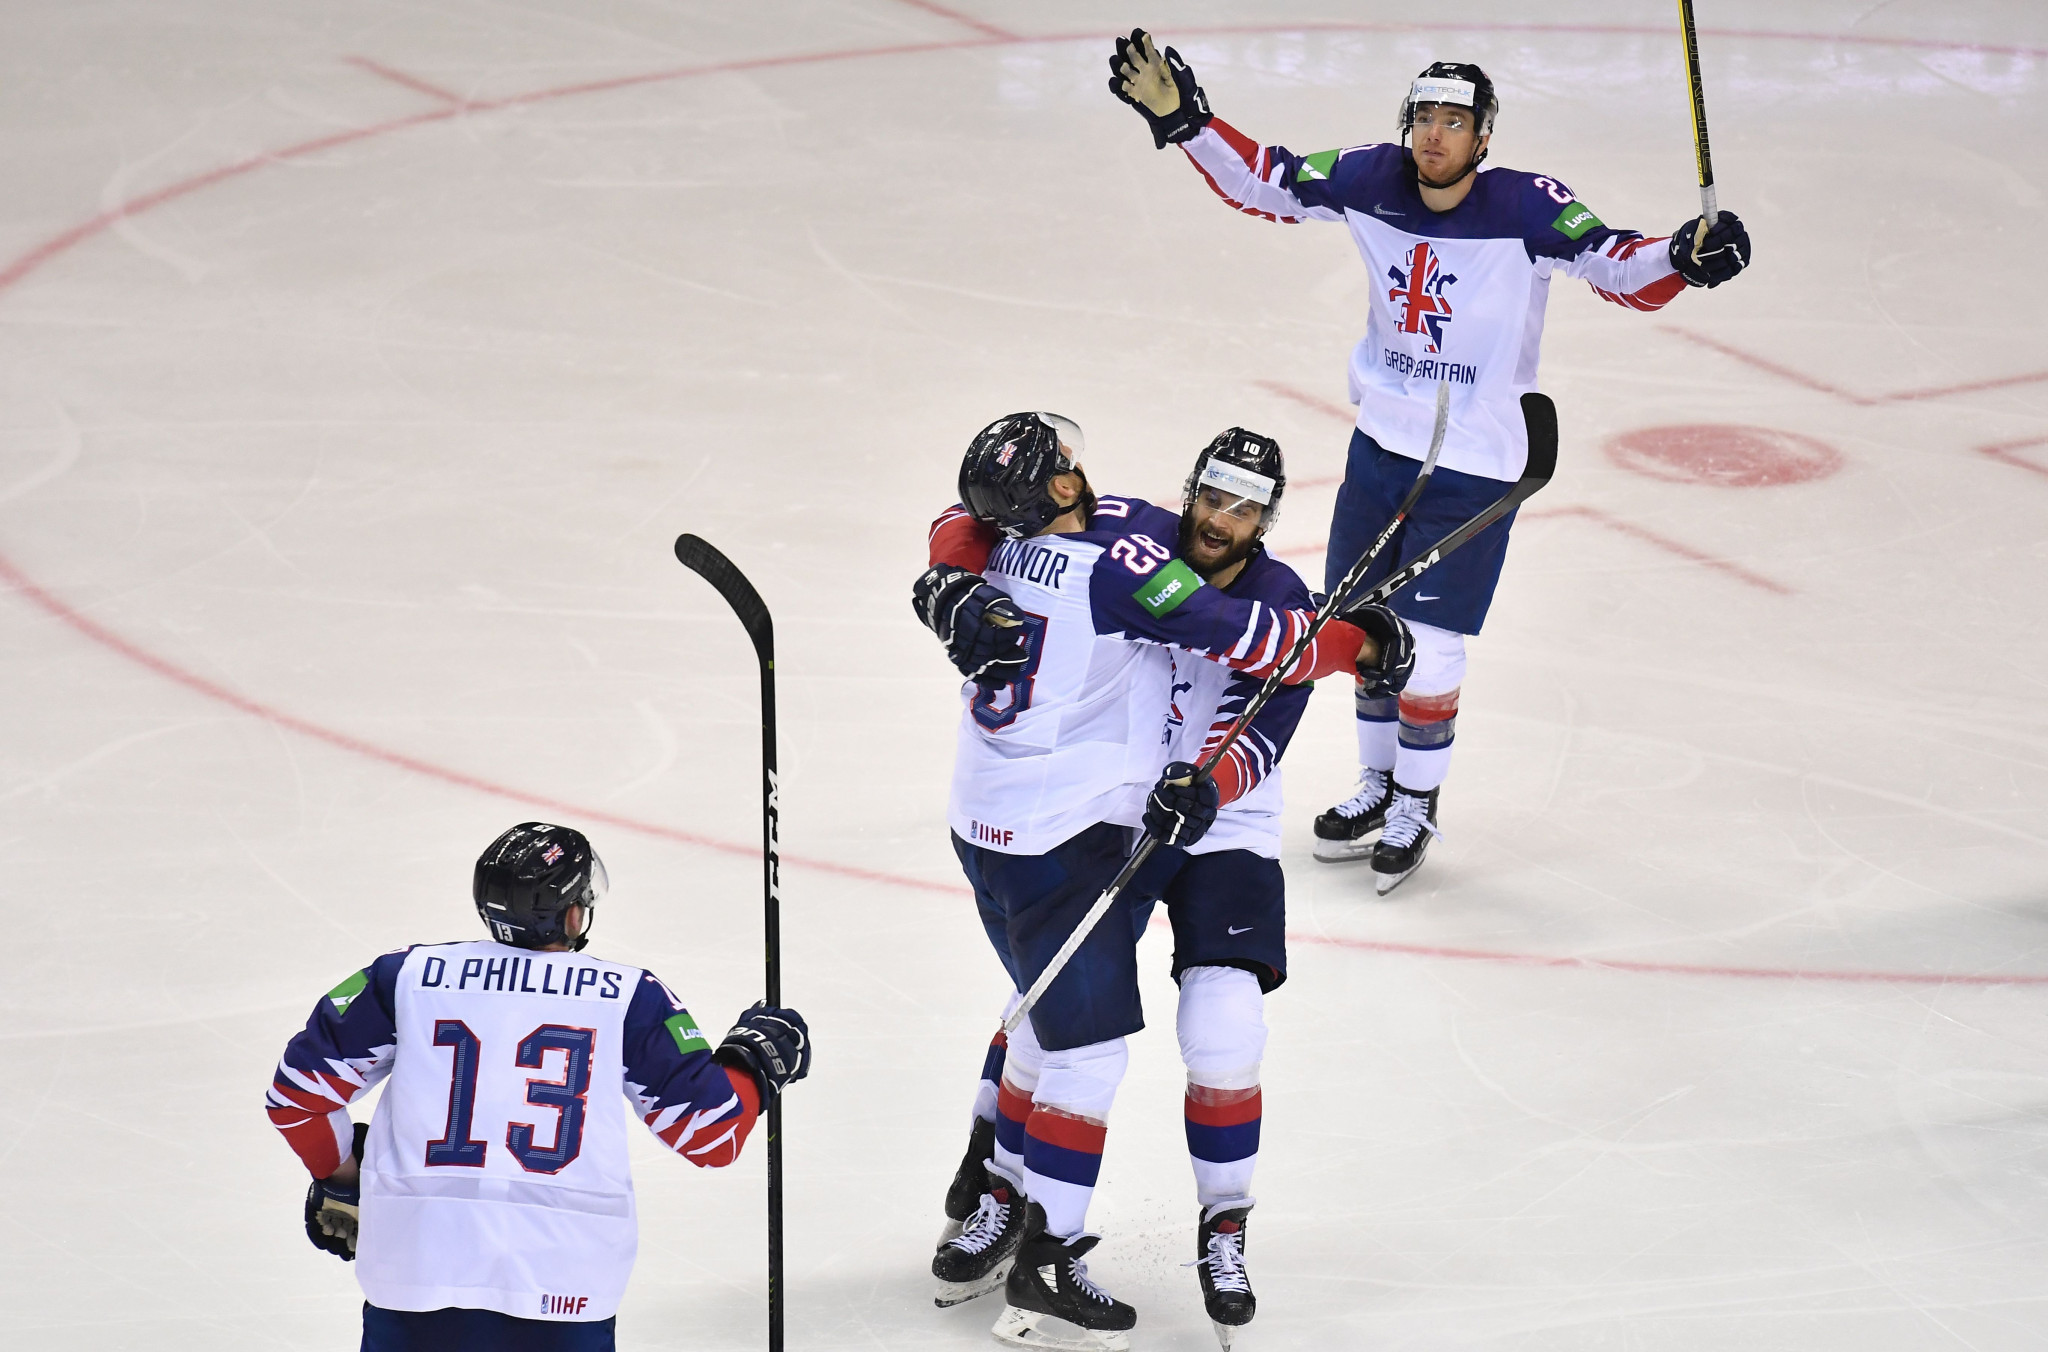 Nottingham has already hosted a men's ice hockey qualifier for Beijing 2022 ©Getty Images